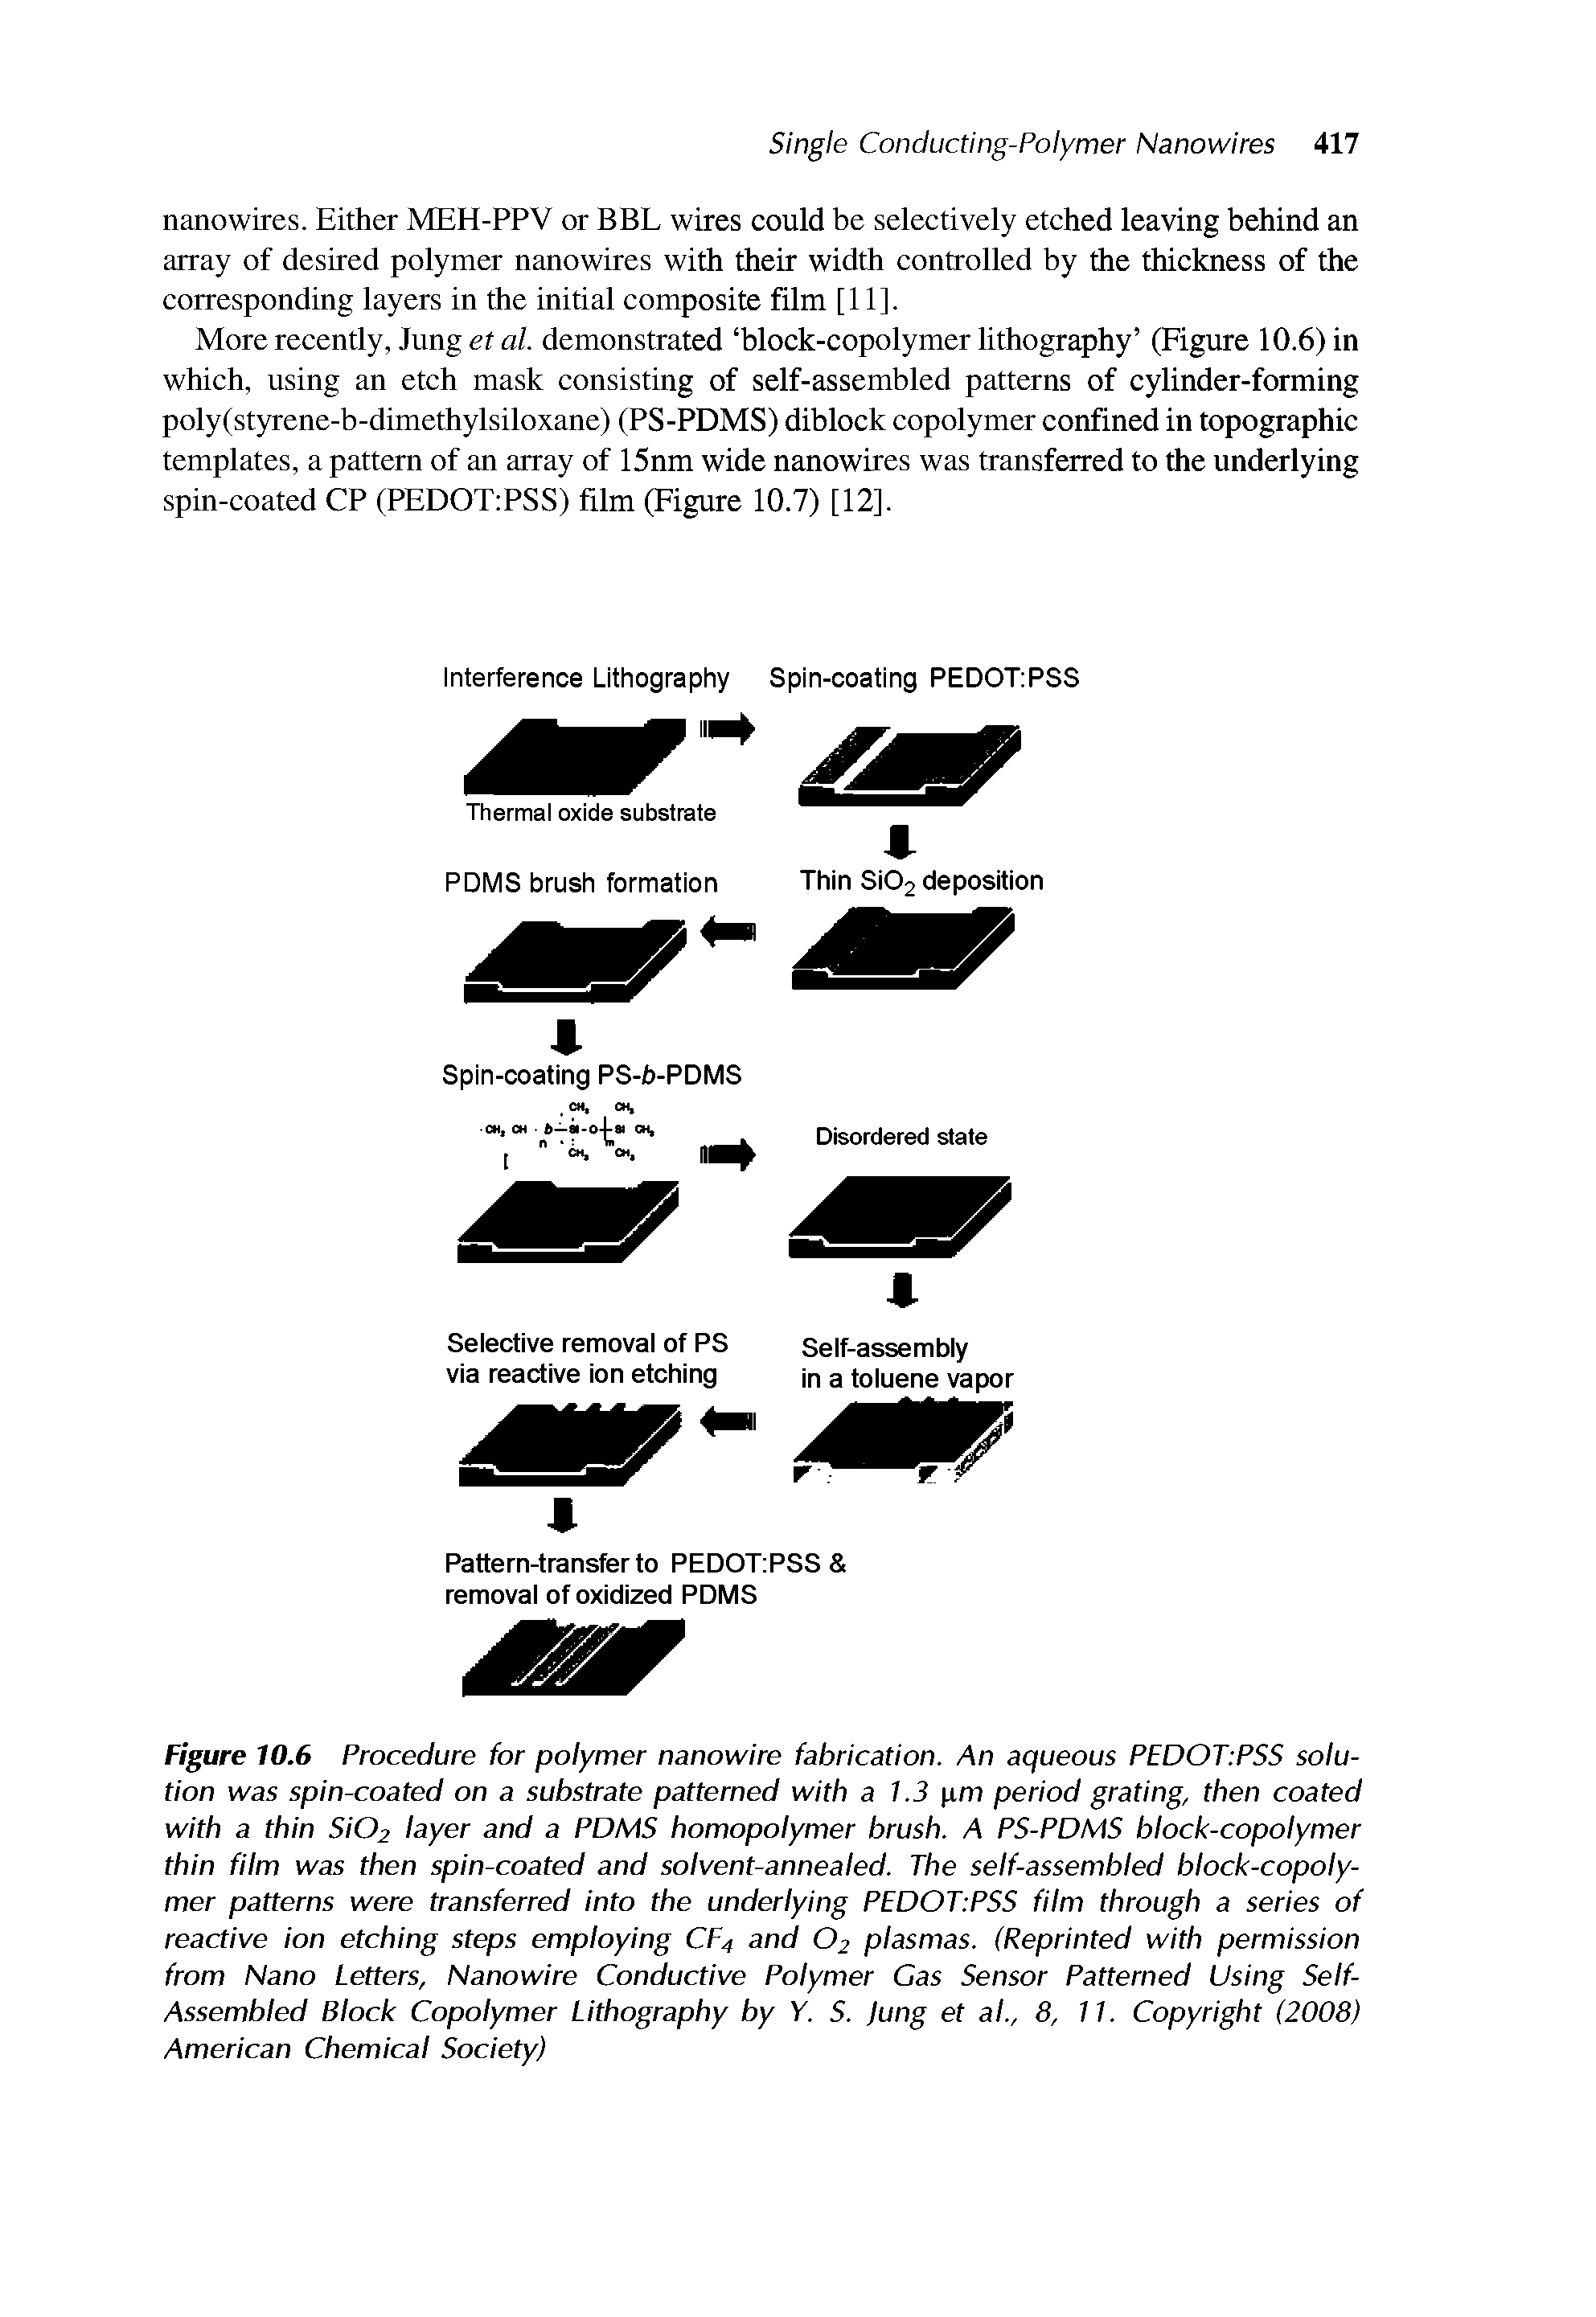 Figure 10.6 Procedure for polymer nanowire fabrication. An aqueous PEDOTtPSS solution was spin-coated on a substrate patterned with a 1.3 ym period grating, then coated with a thin Si02 layer and a PDMS homopolymer brush. A PS-PDMS block-copolymer thin film was then spin-coated and solvent-annealed. The self-assembled block-copolymer patterns were transferred into the underlying PEDOT-.PSS film through a series of reactive ion etching steps employing CF4 and O2 plasmas. (Reprinted with permission from Nano Letters, Nanowire Conductive Polymer Gas Sensor Patterned Using Self-Assembled Block Copolymer Lithography by Y. S. Jung et al., 8, 11. Copyright (2008) American Chemical Society)...